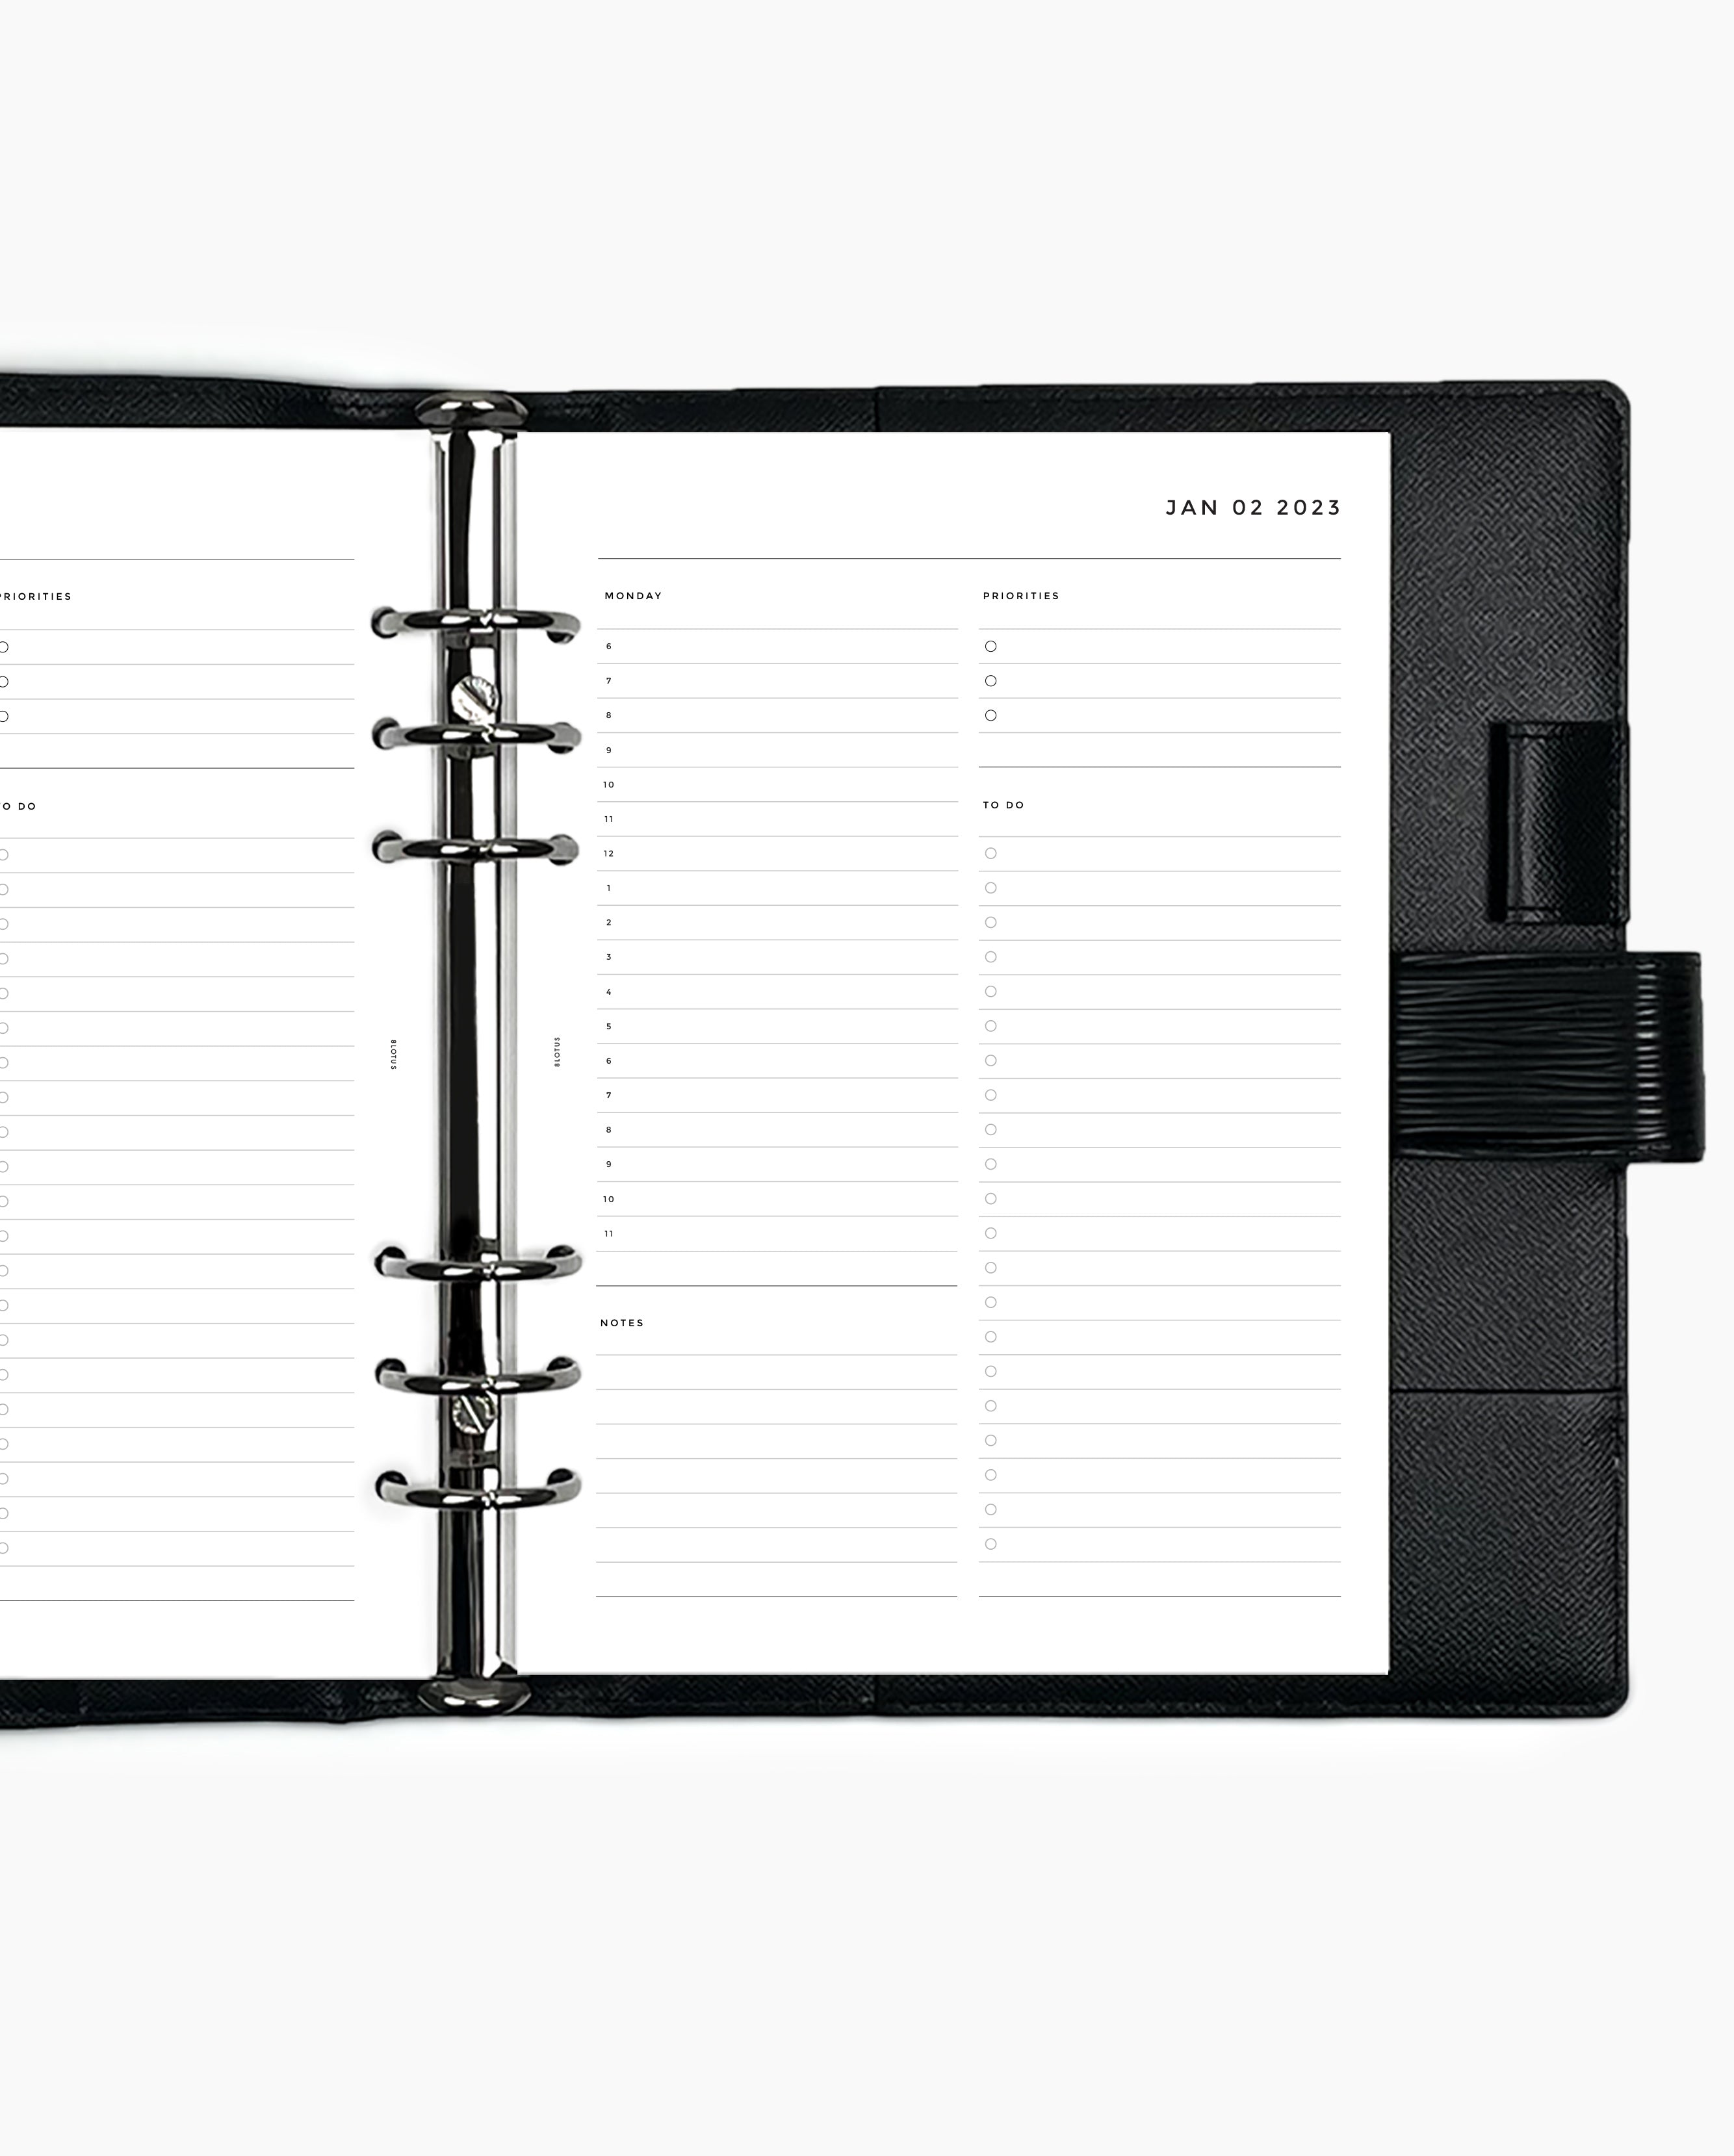 MN076 - 2023 Daily Planner - Hourly - DO1P